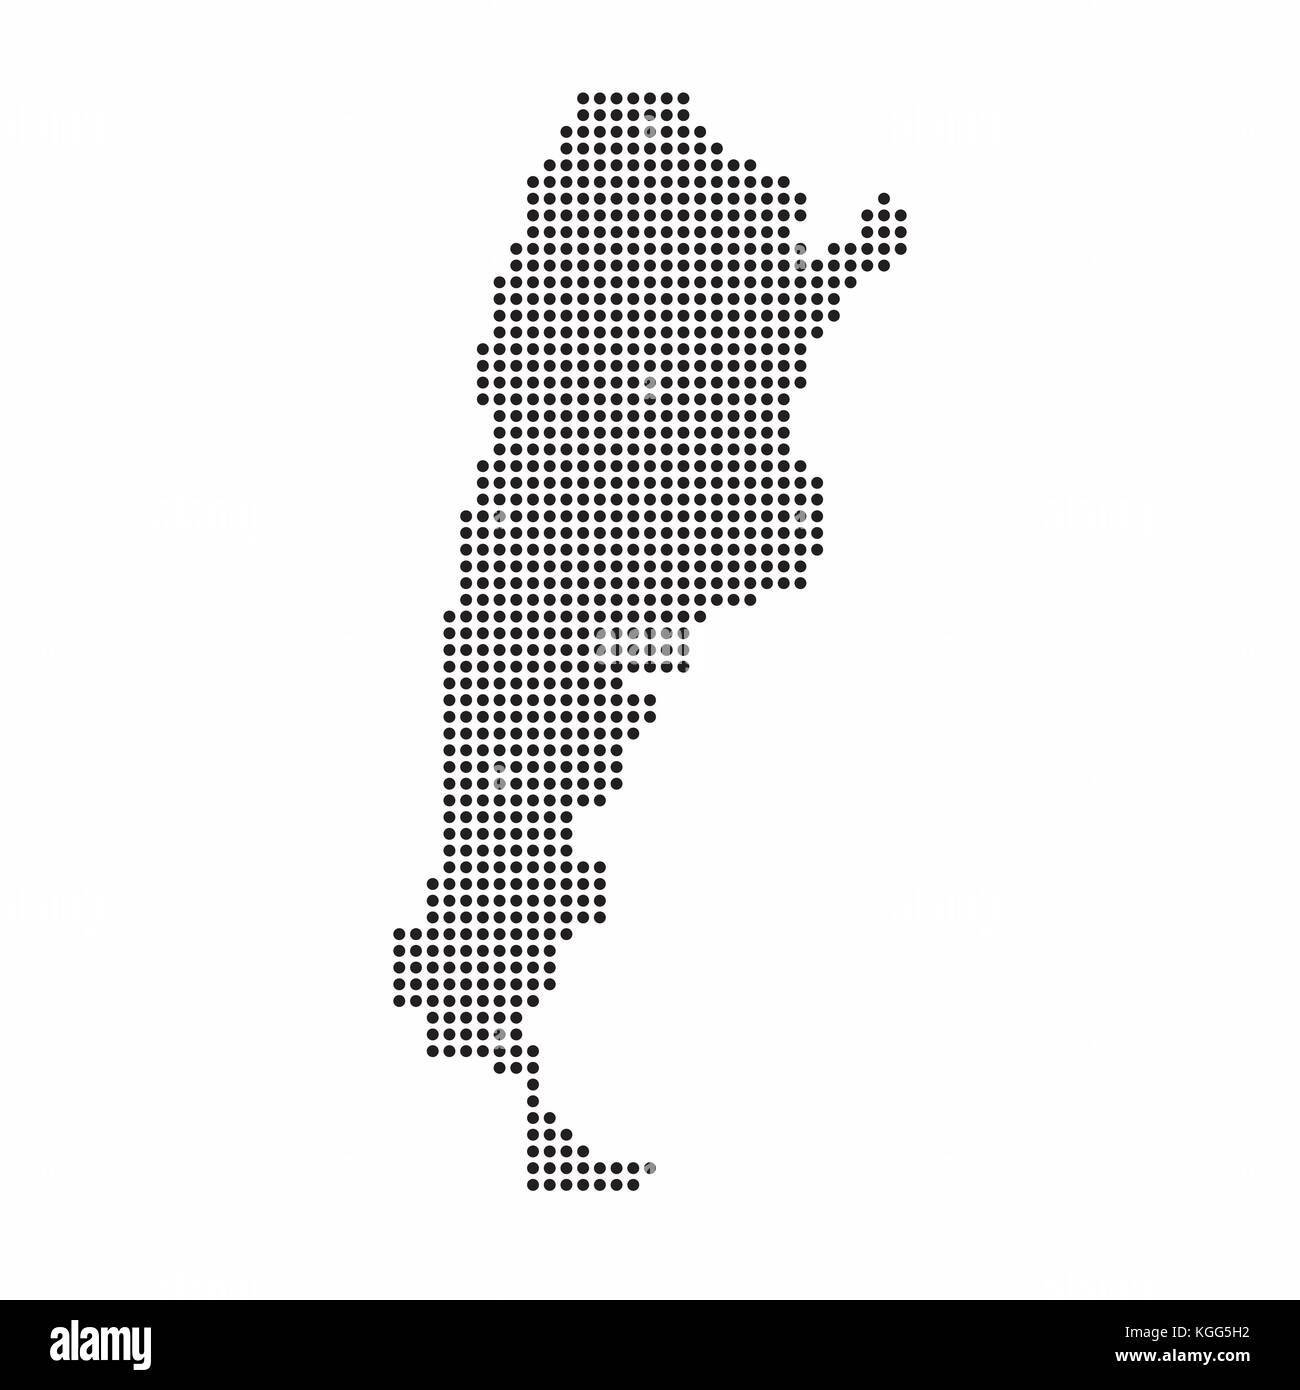 Argentina country map made from abstract halftone dot pattern Stock Vector